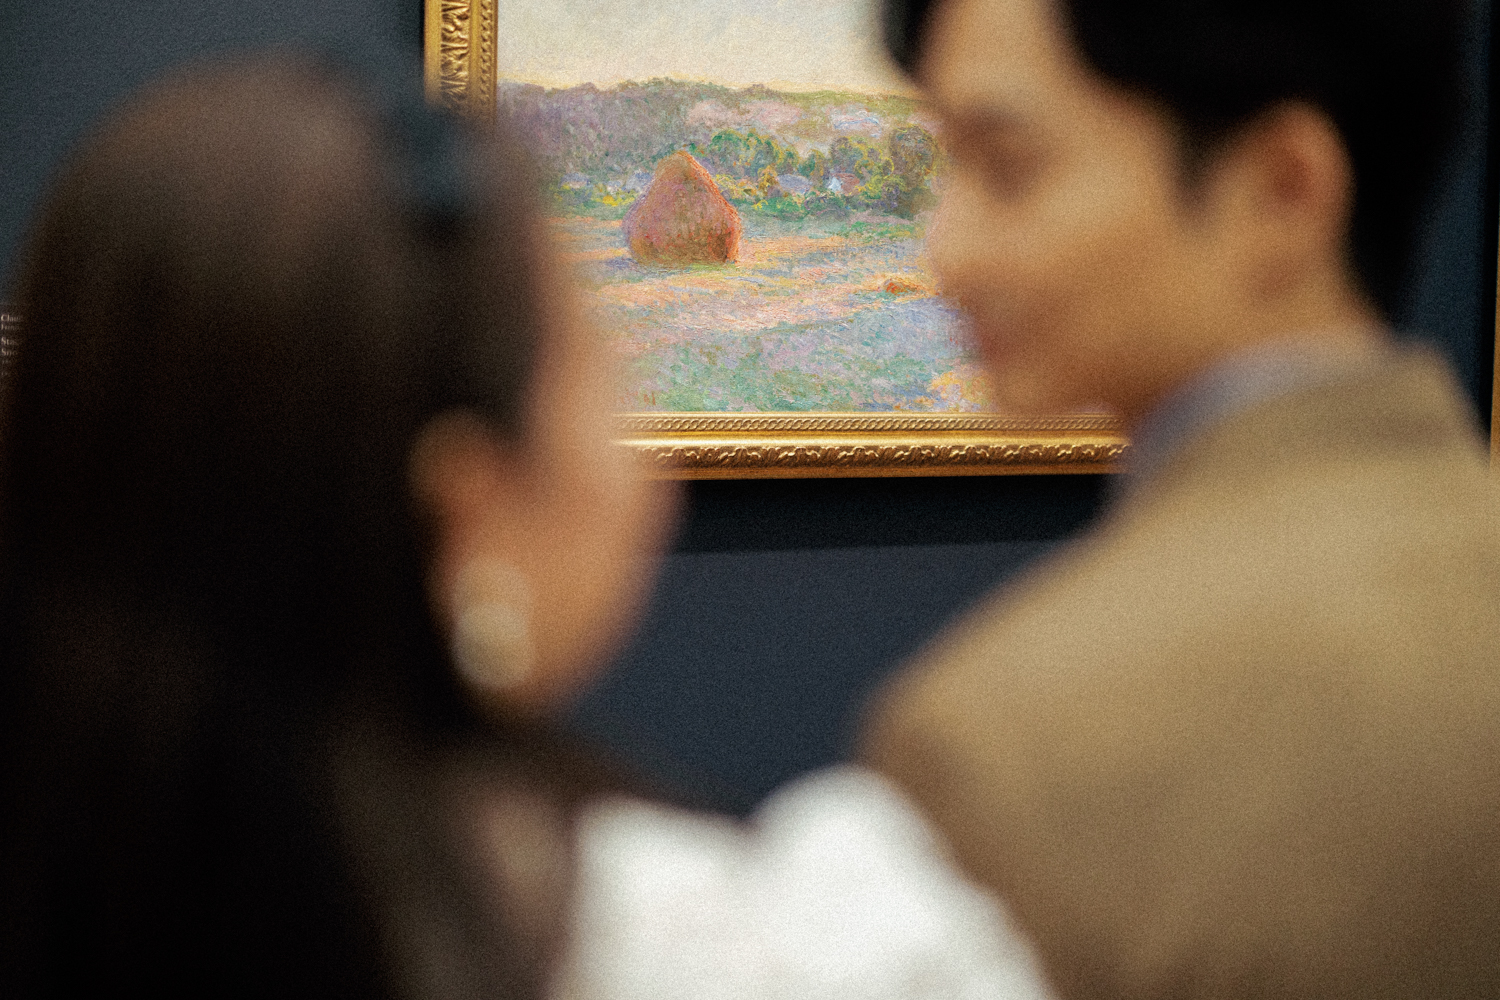 Engagement photos in front of Monet's famous paintings.